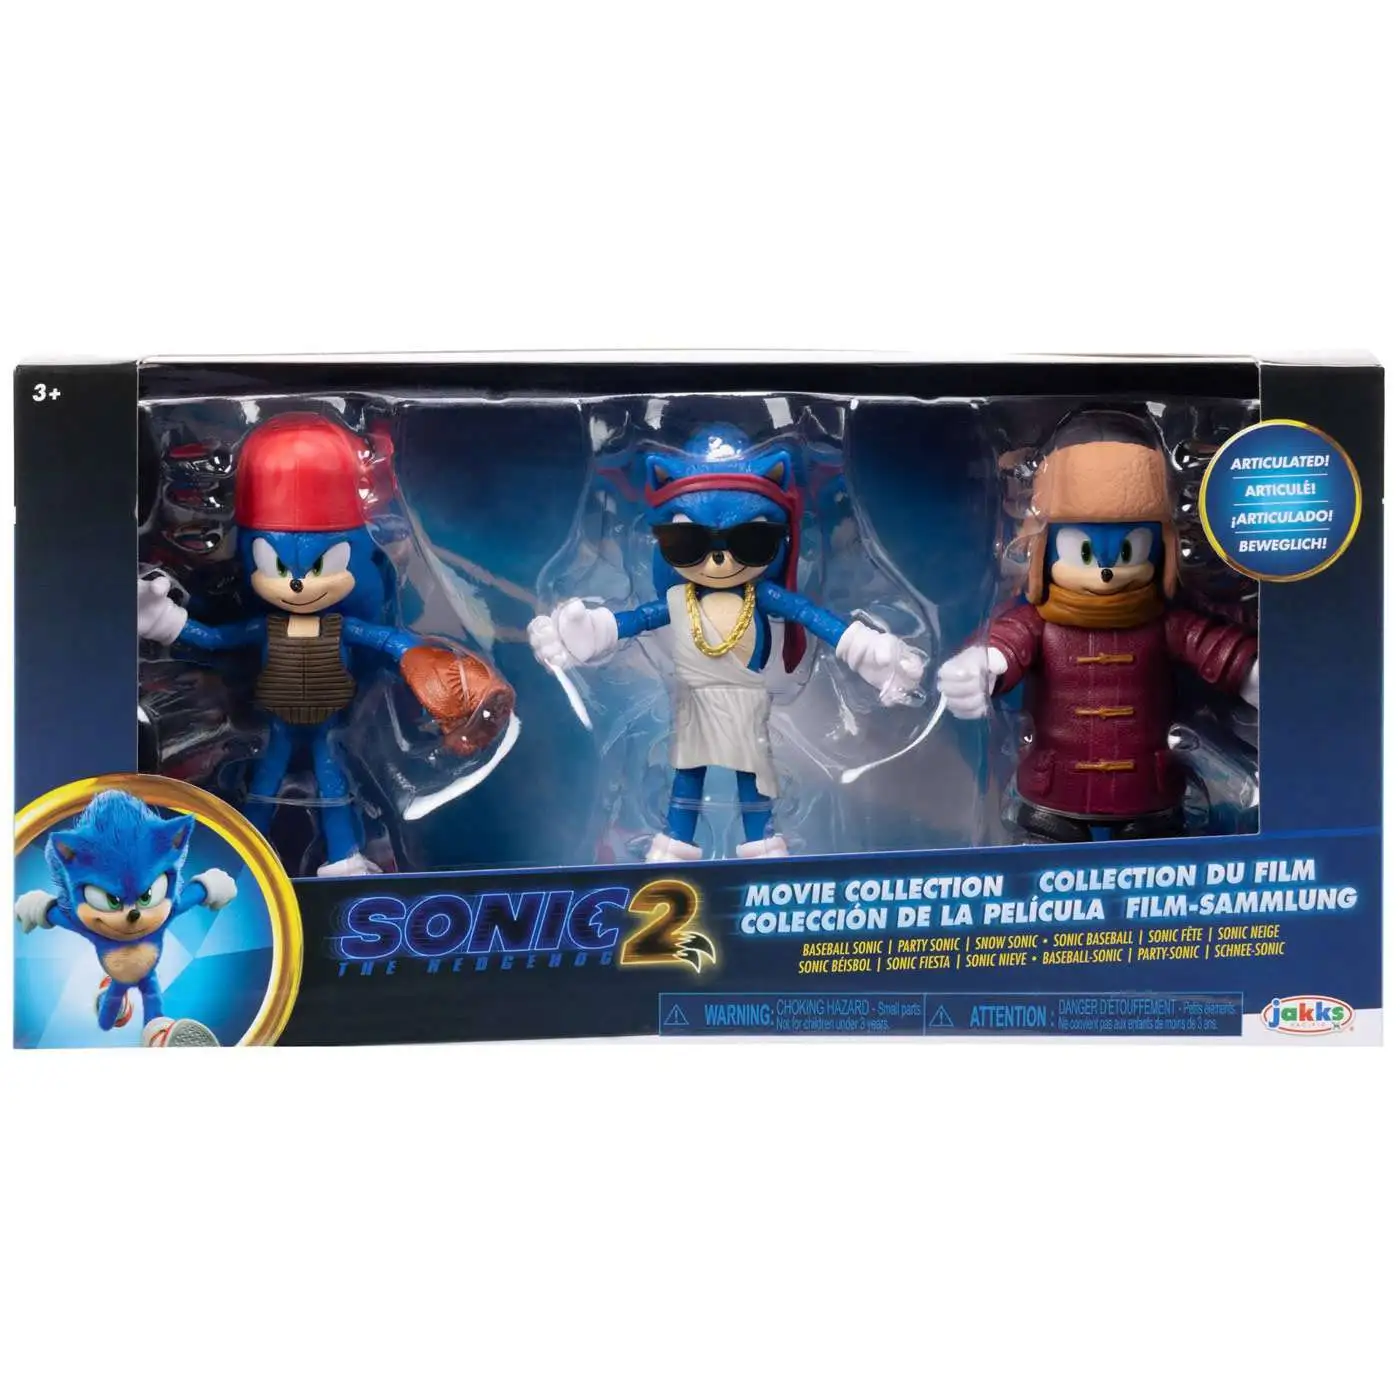 Sonic the Hedgehog movie 2 Action Figure Sonic Speed R/C Toy Set New 2022